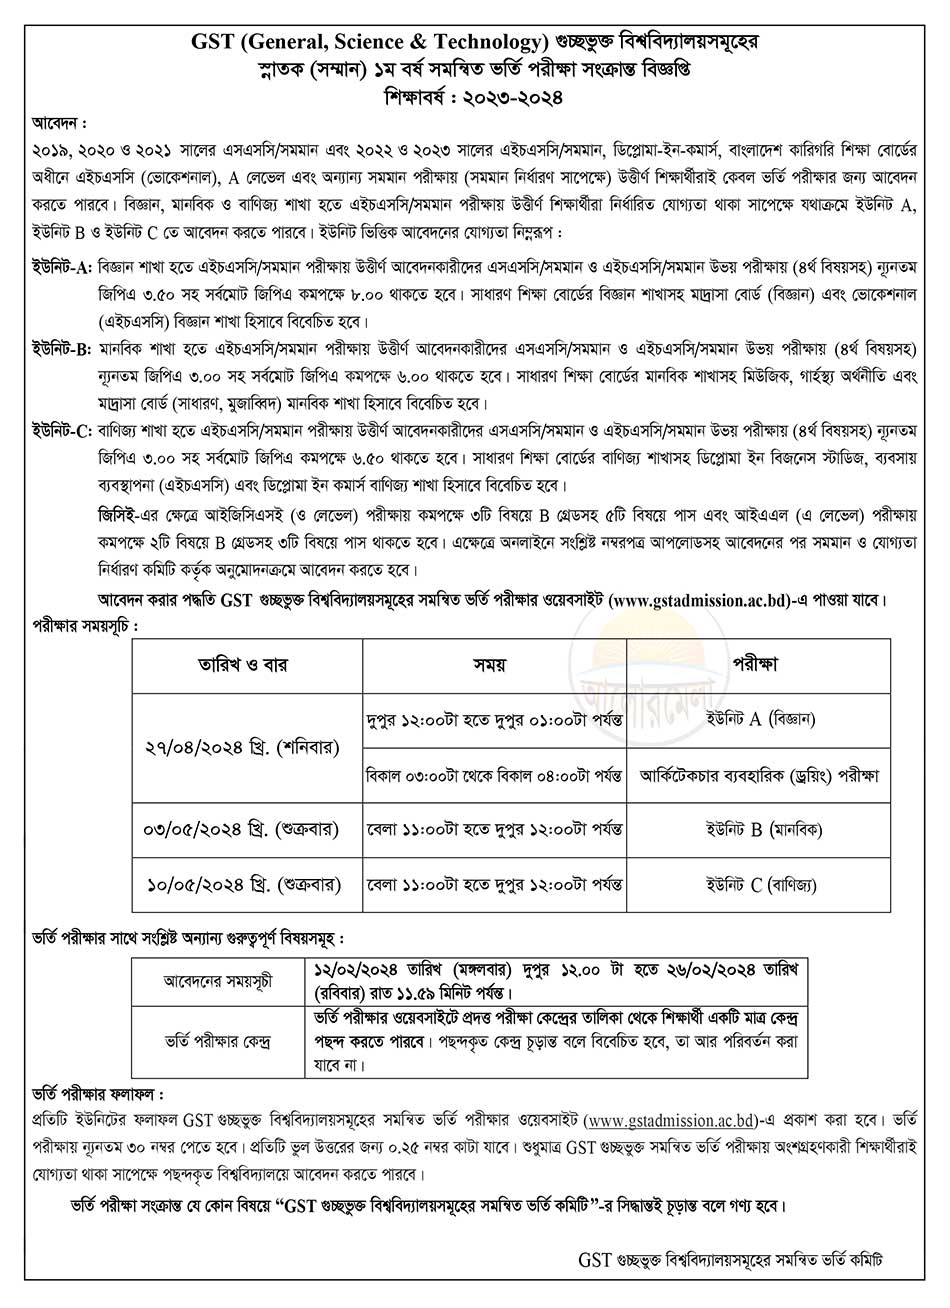 general science and technology gst cluster admission circular 2024